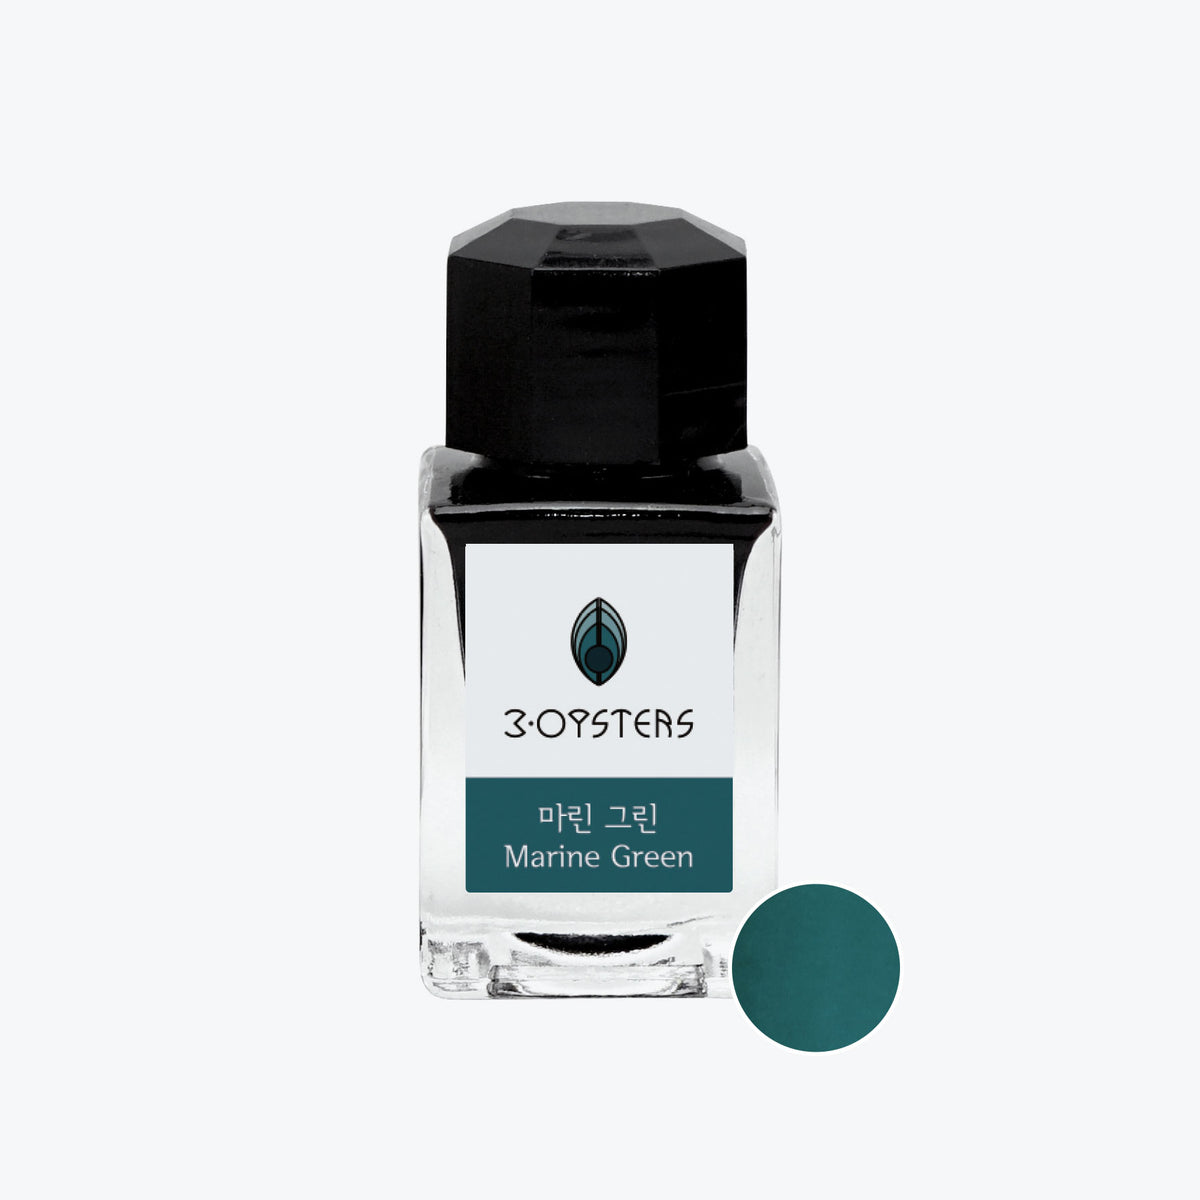 3Oysters - Fountain Pen Ink - Delicious - Marine Green 18ml